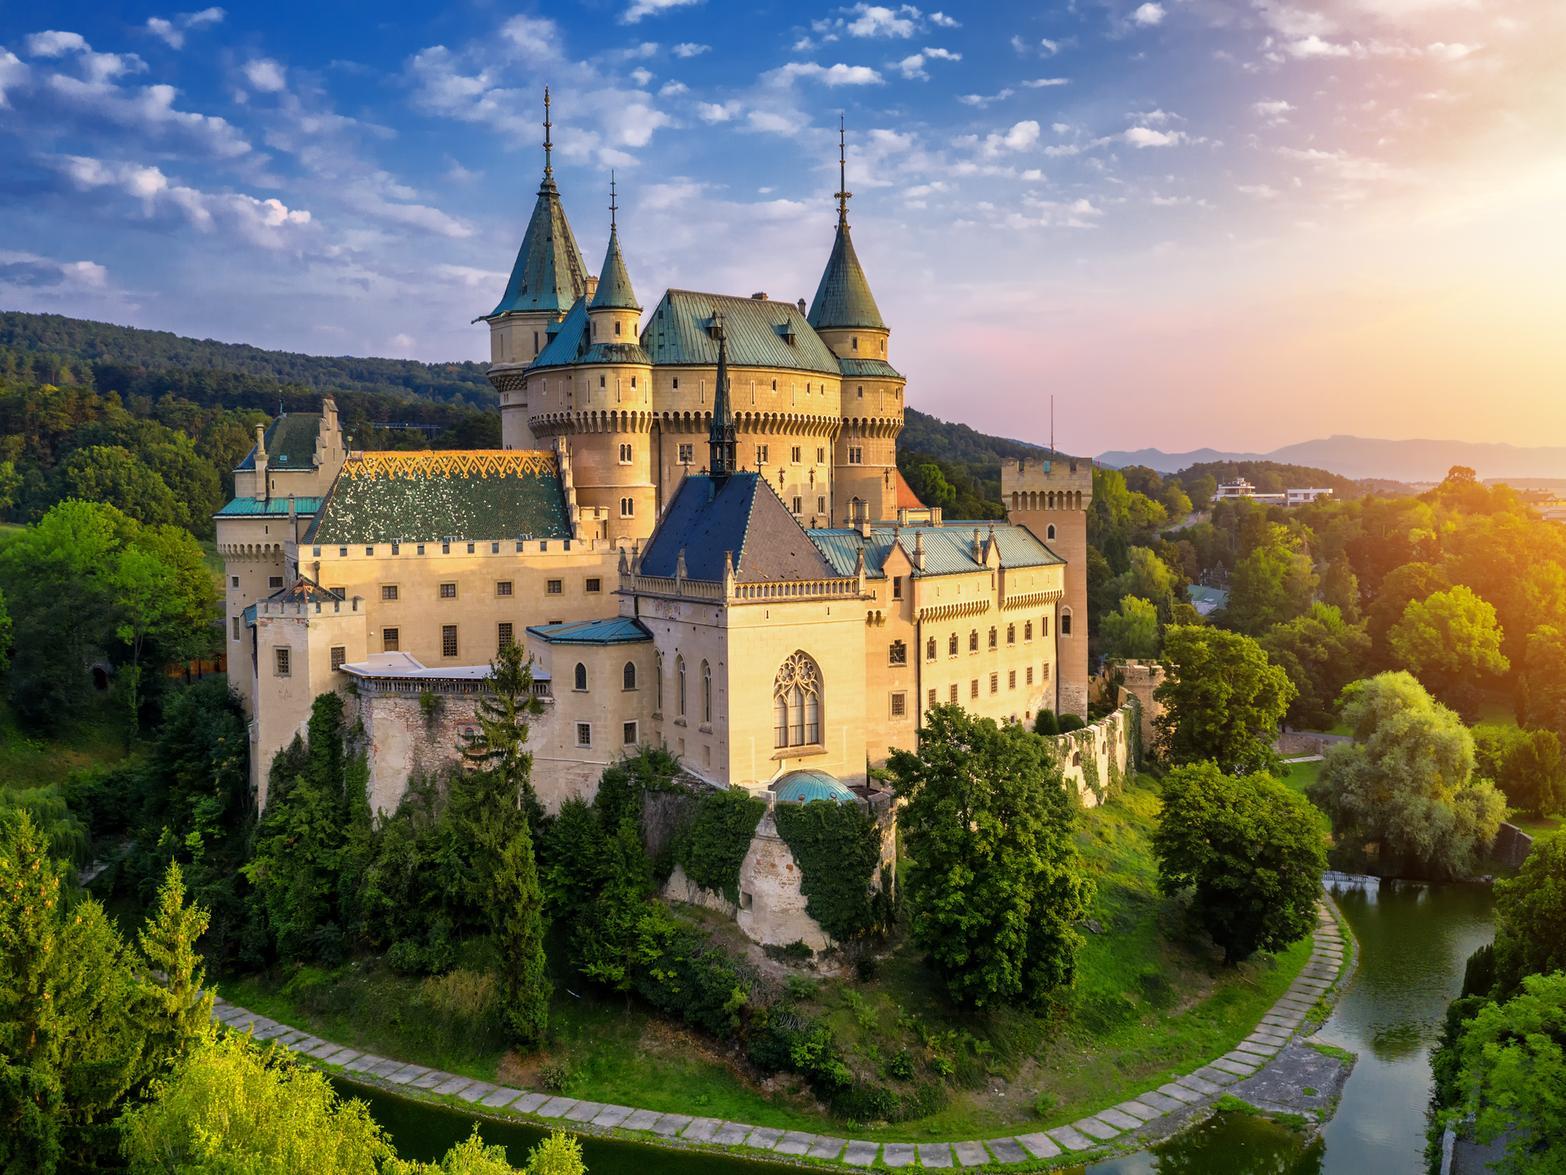 Slovakia is covered in dense rich woodlands, dotted with historic castles and villages - perfect for adventurers.